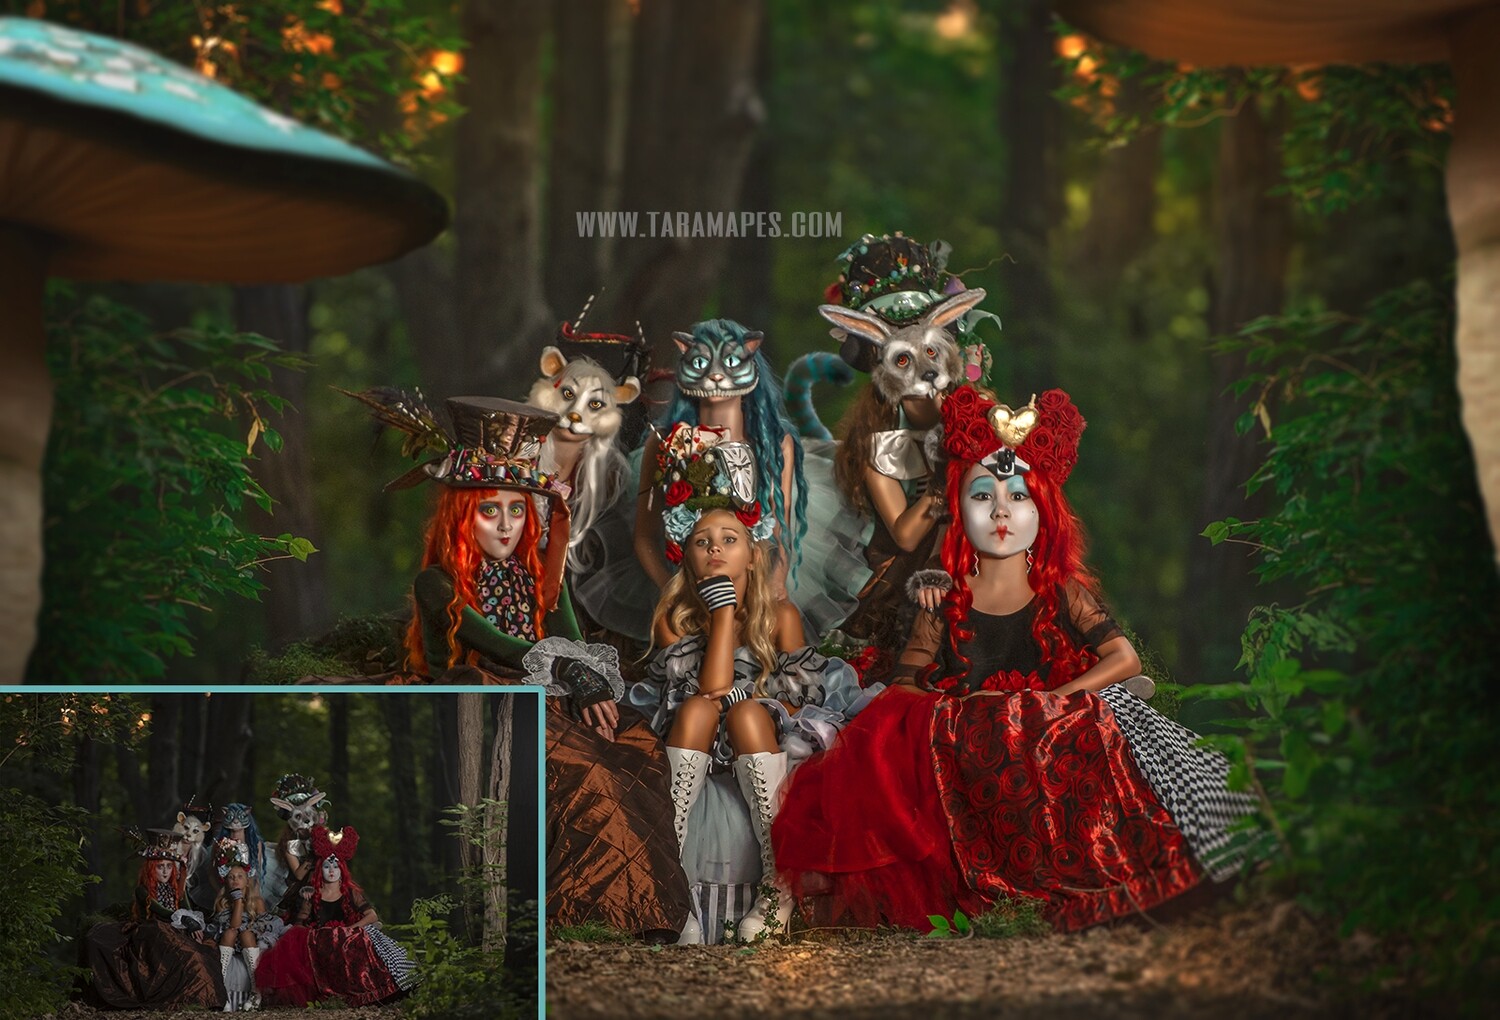 The Wonderland Gang Painterly Editing and Compositing Photoshop Tutorial by Tara Mapes - Alice in Wonderland Inspired